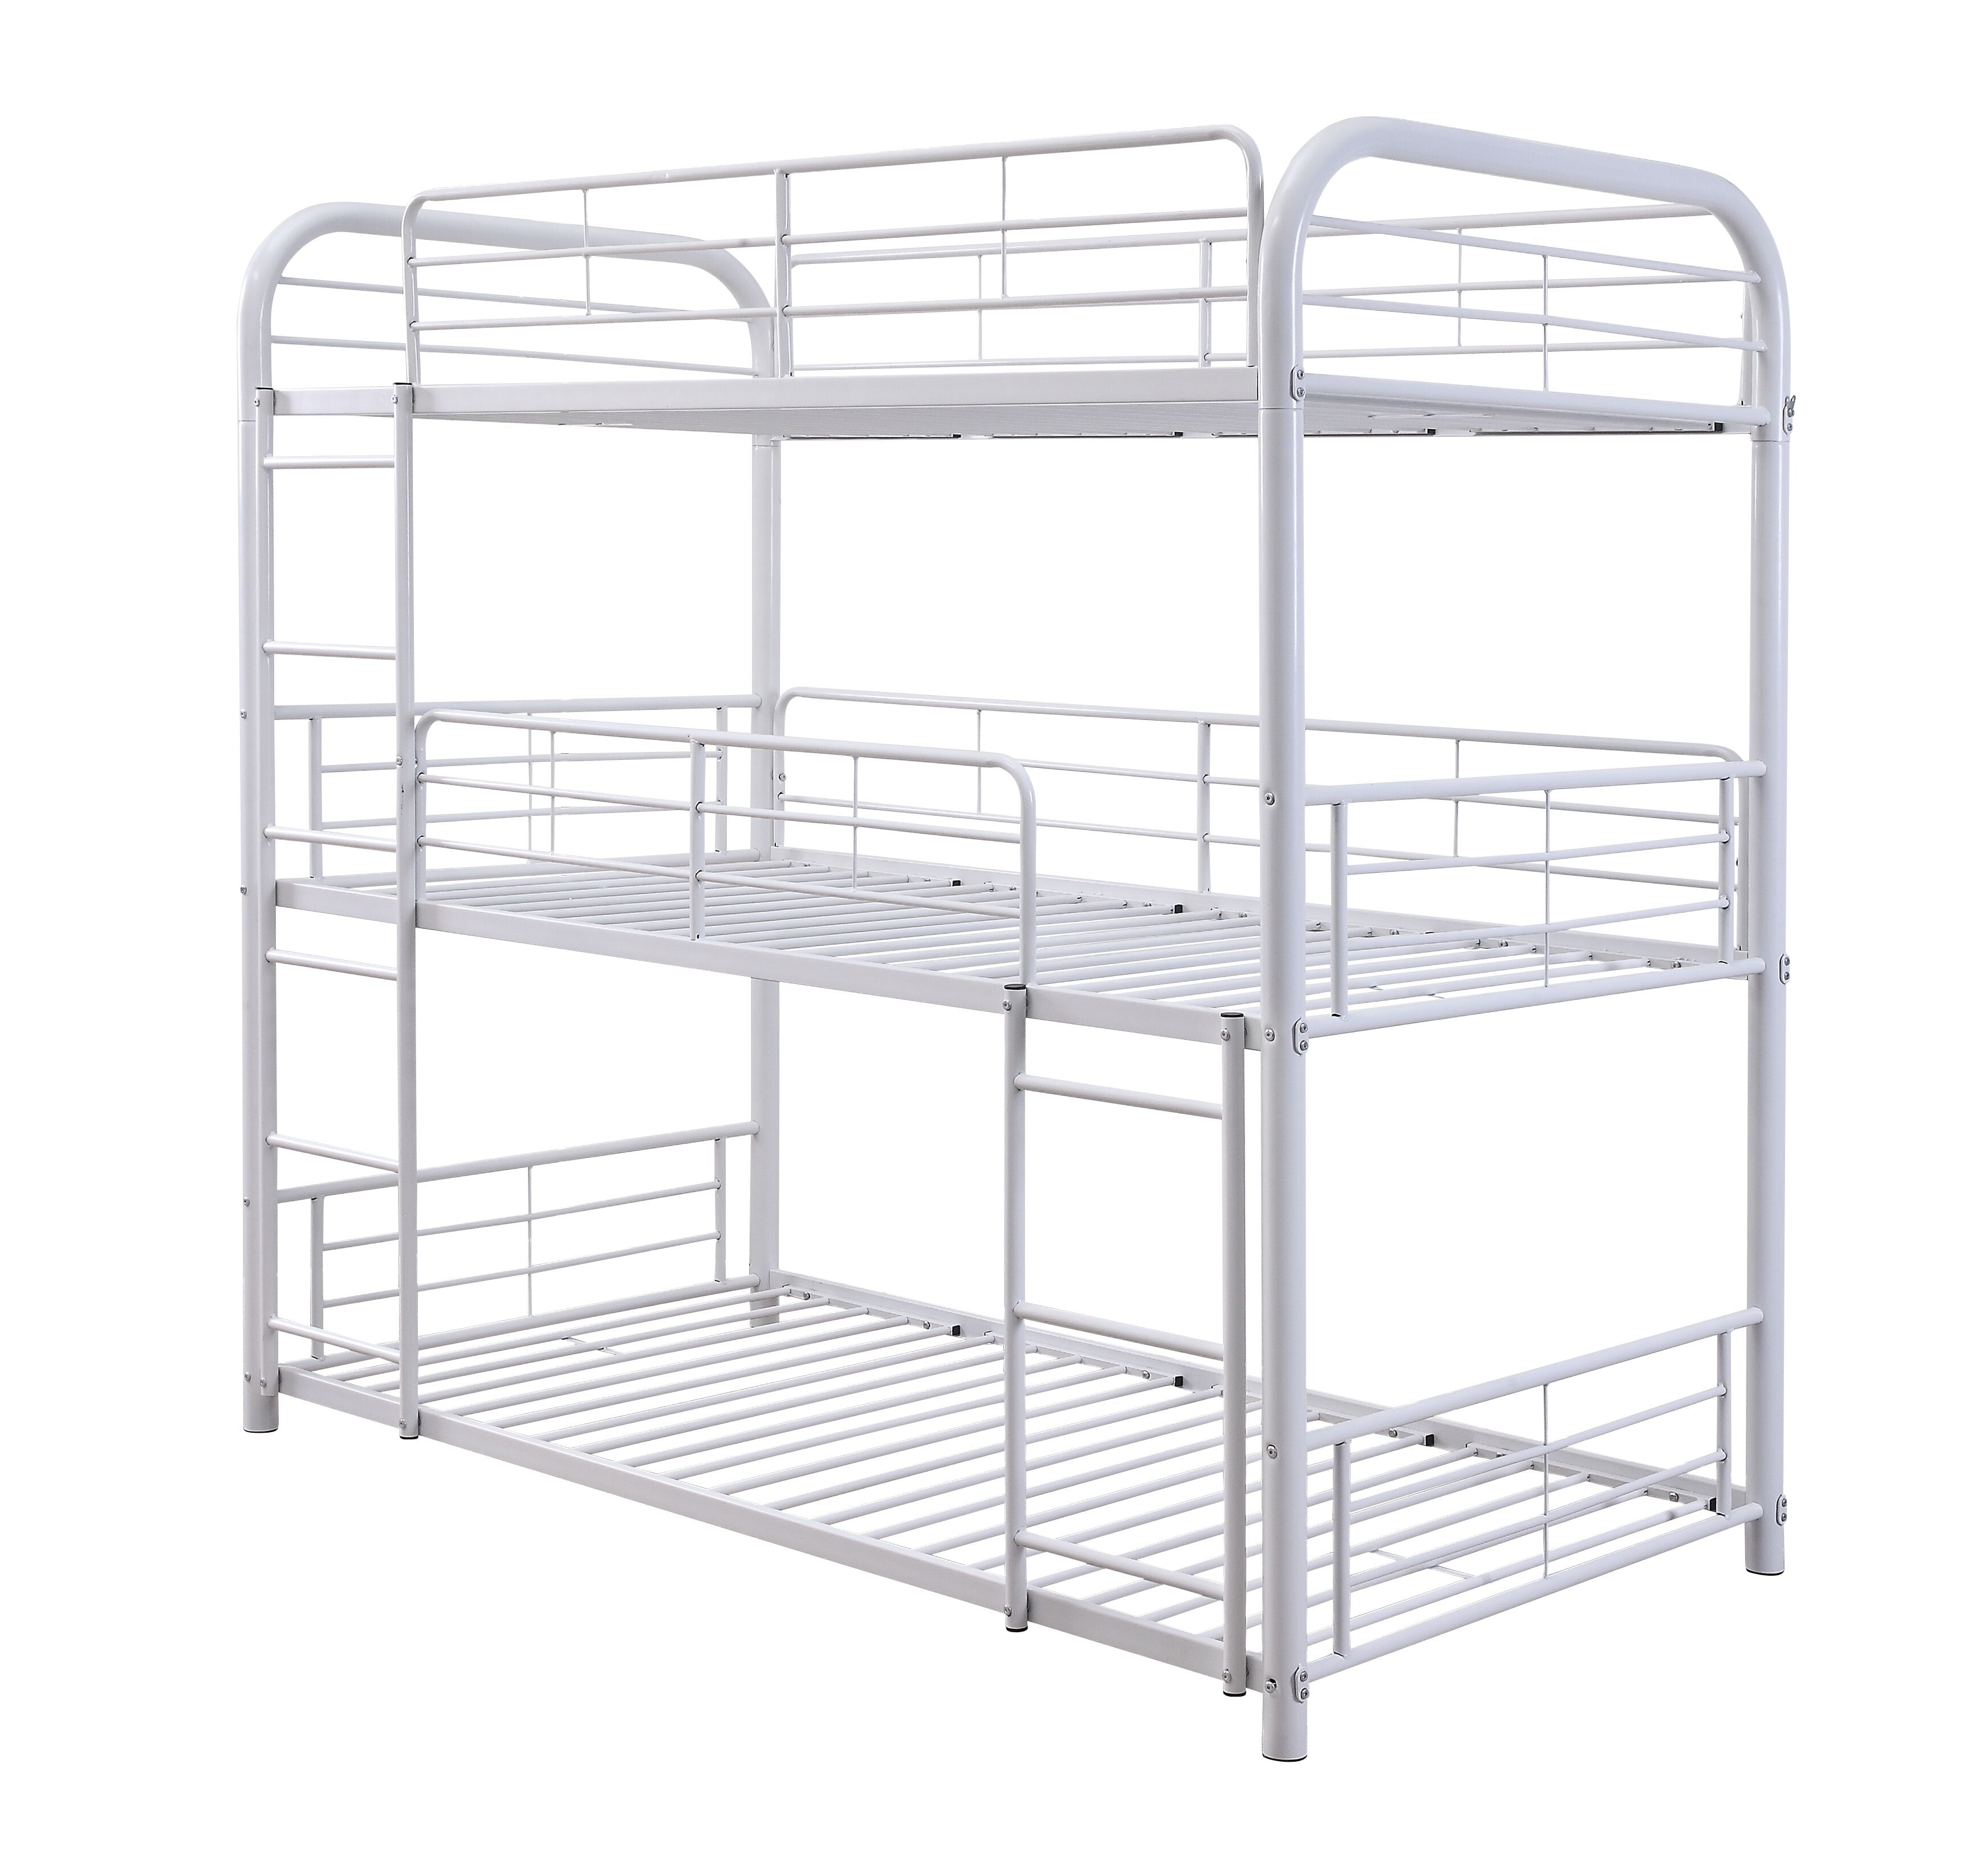 Picture of ACME 38110 Cairo Triple Bunk Bed - Twin Size, White - 2 Piece